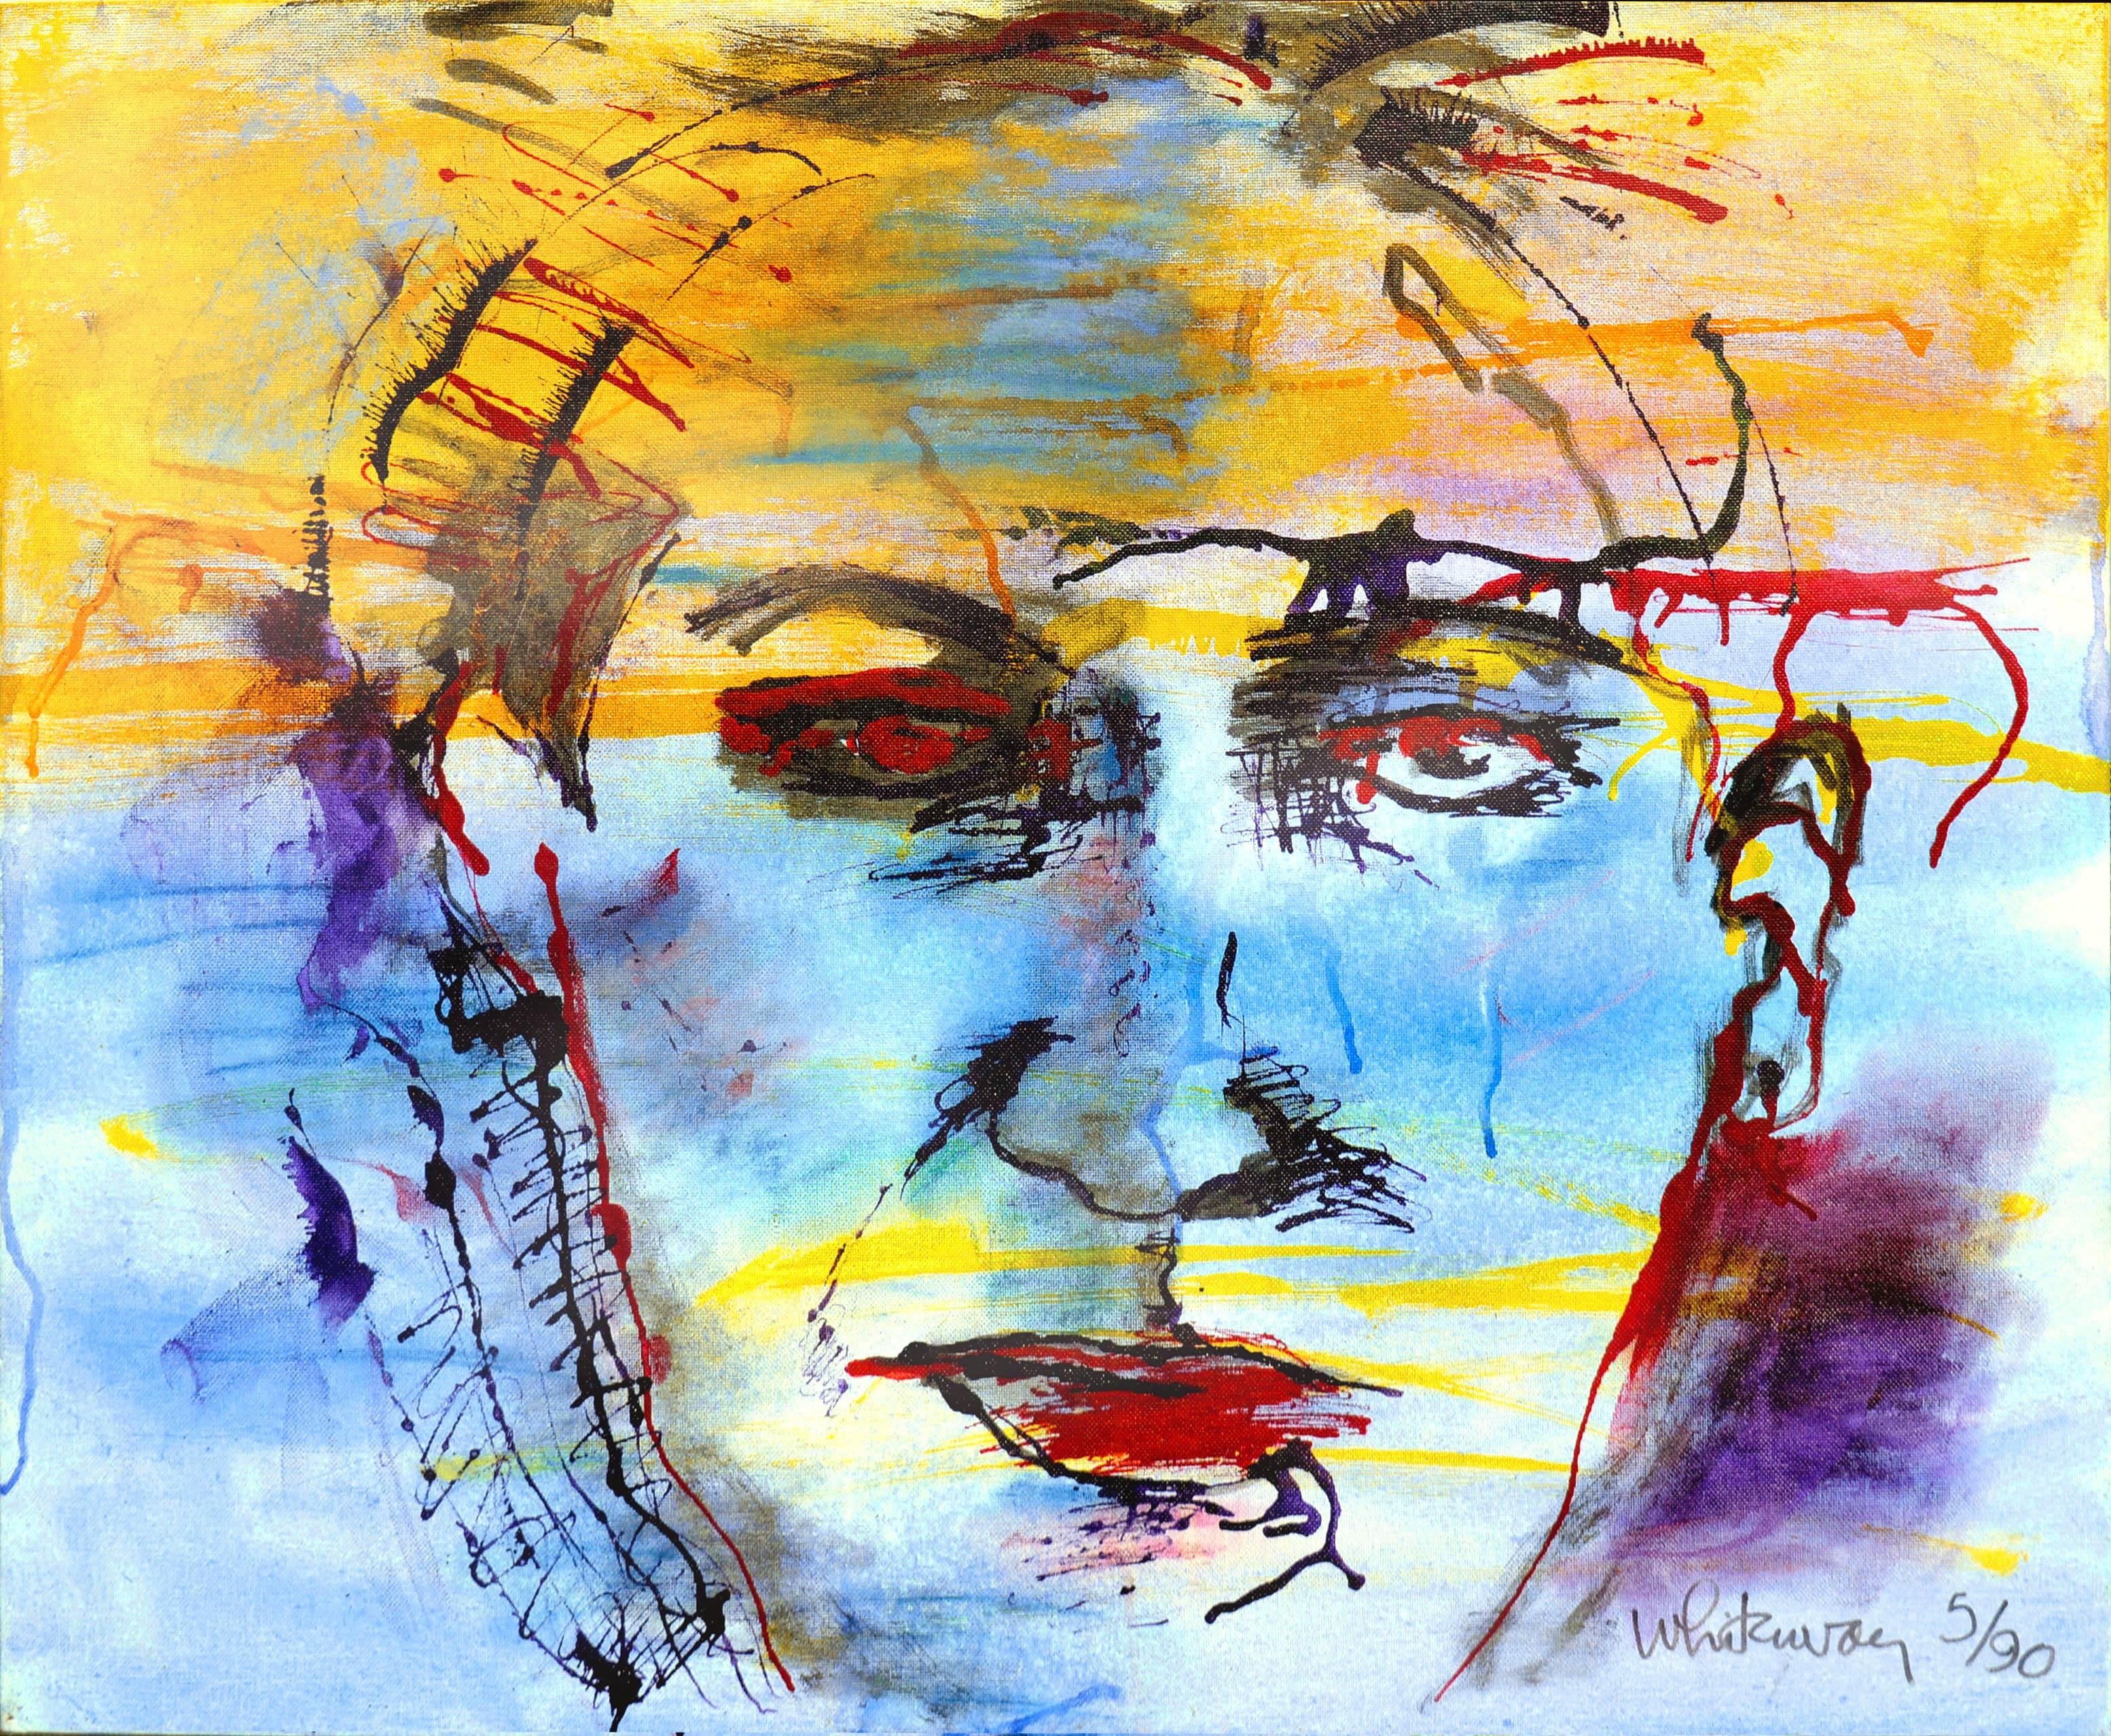 Abstracted Self Portrait by Erica Whiteway